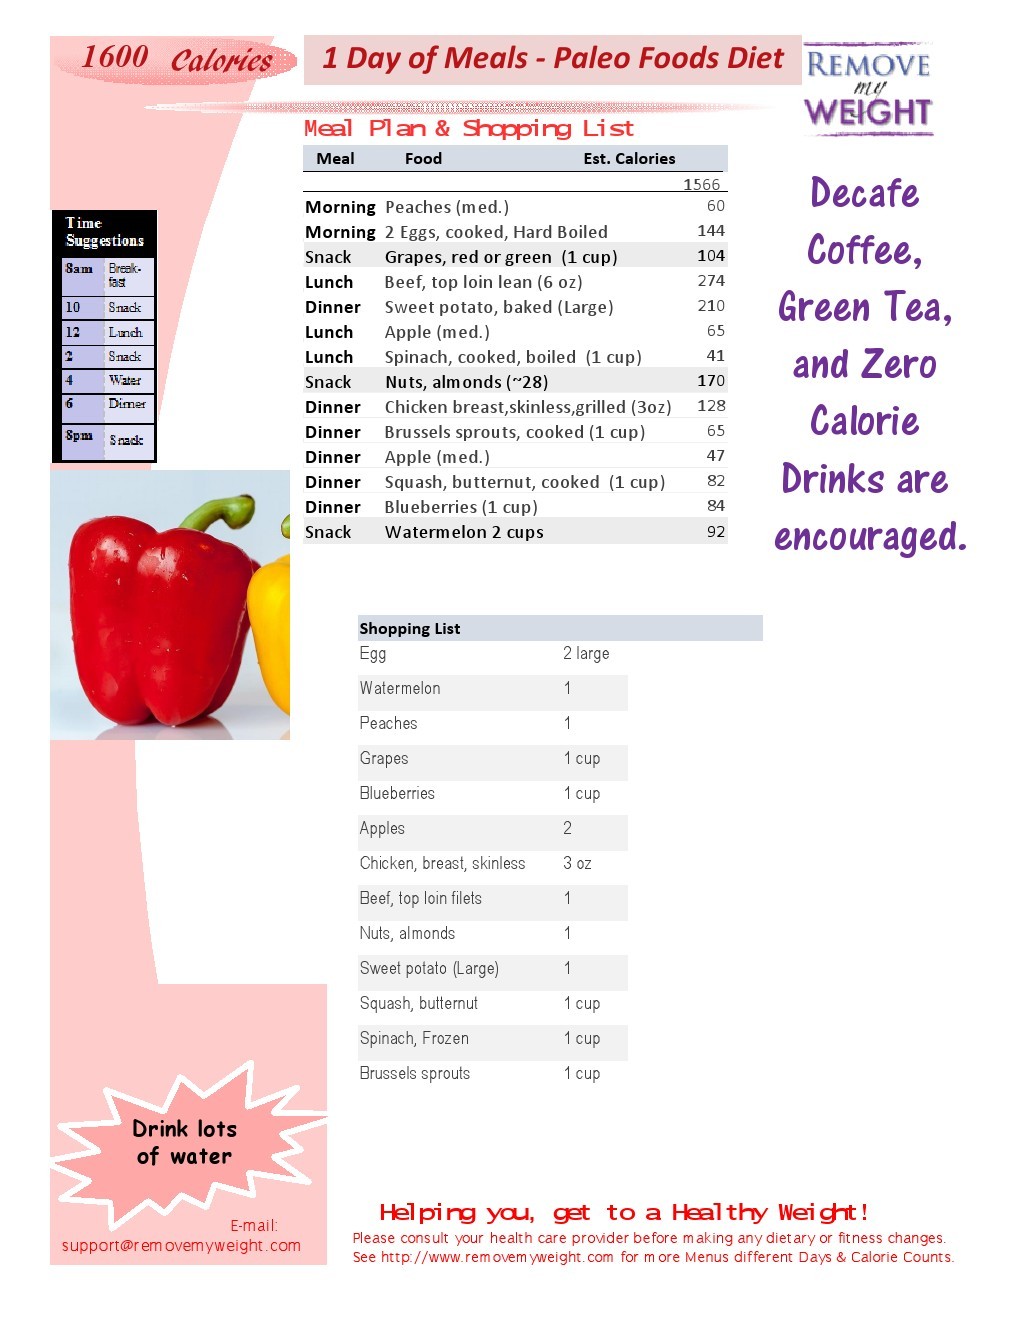 ... Paleo Diet with Shoppong List - Printable - Menu Plan for Weight Loss